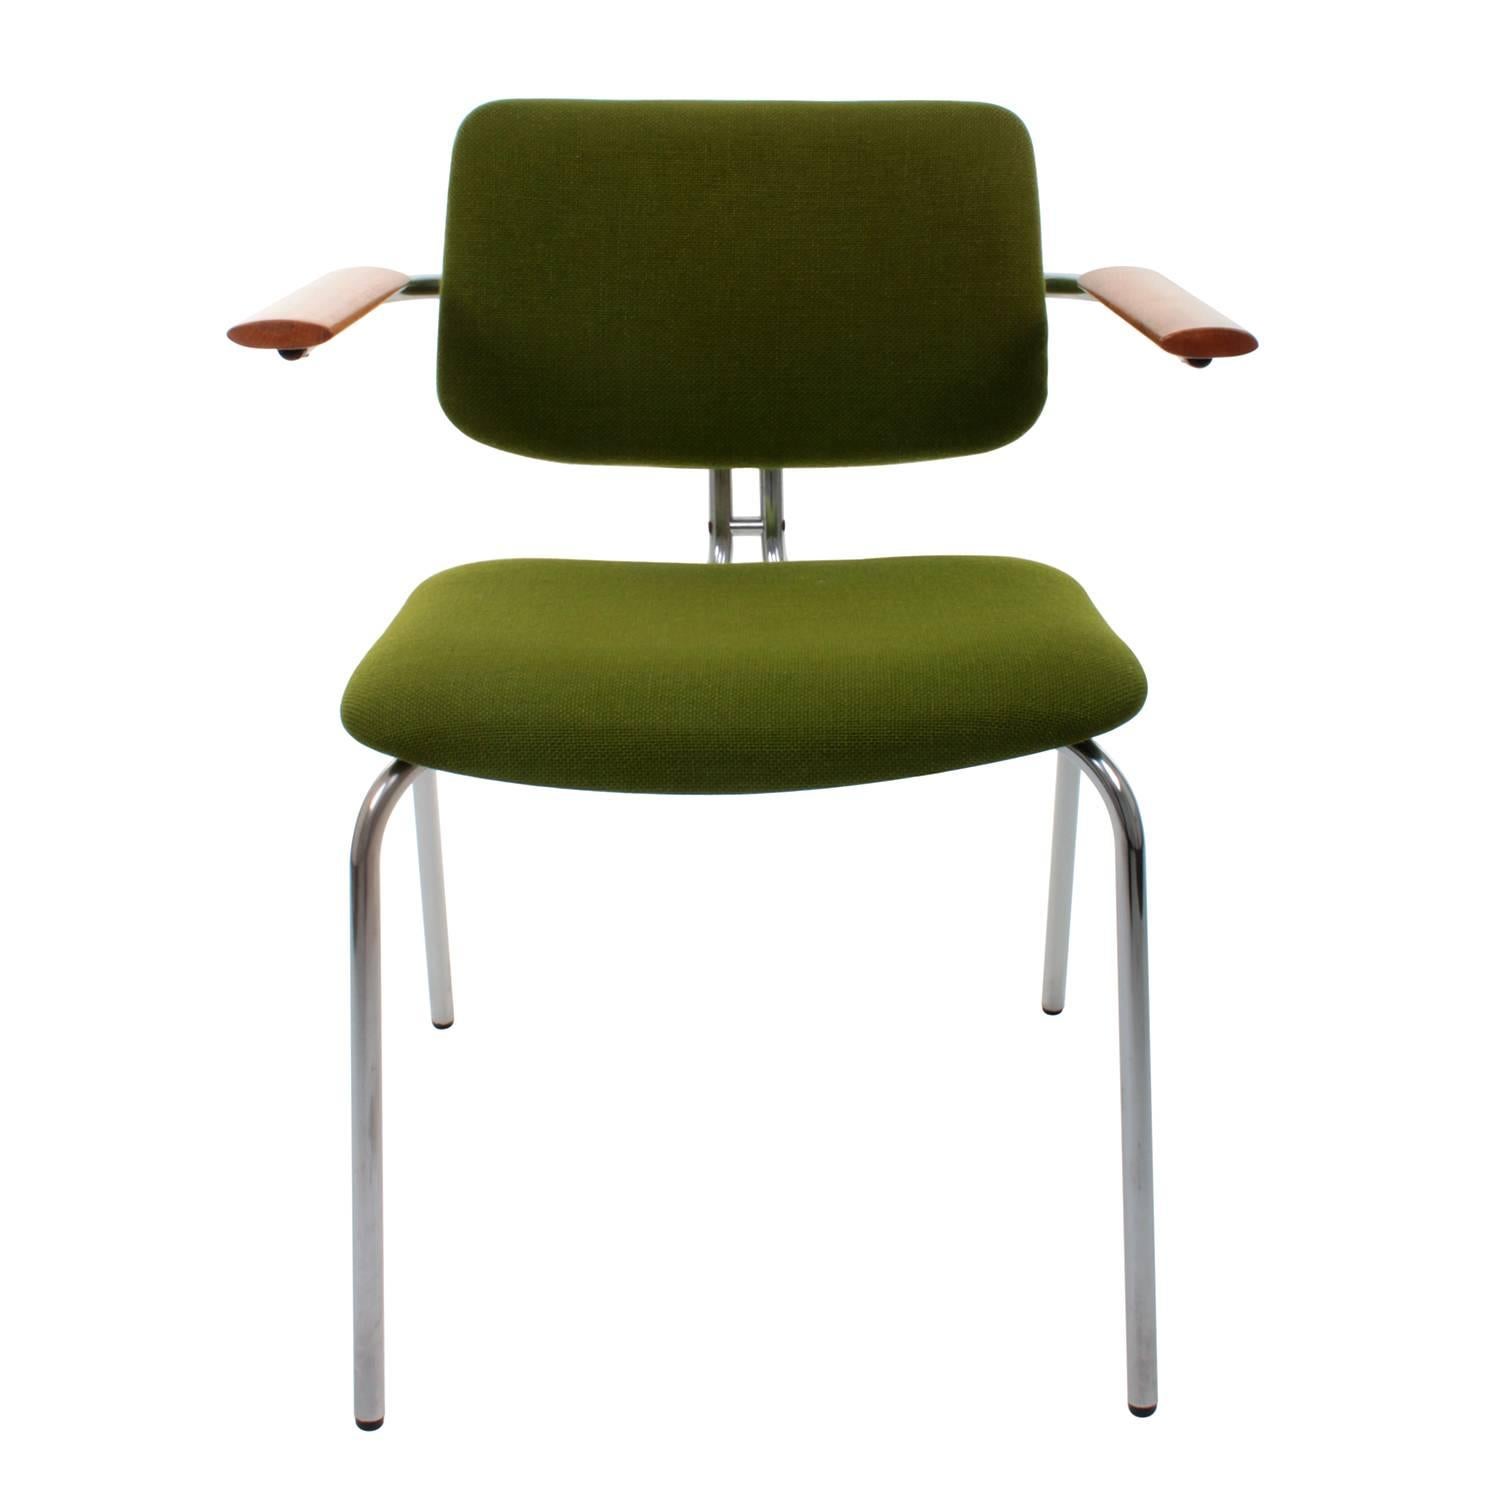 Chair by Duba Møbelindustri in the 1980s, vintage dining chair with original grass-green wool upholstery, beech armrest and chromed legs - in very good vintage condition.

A very attractive dining chair, shaped a little different to common slim